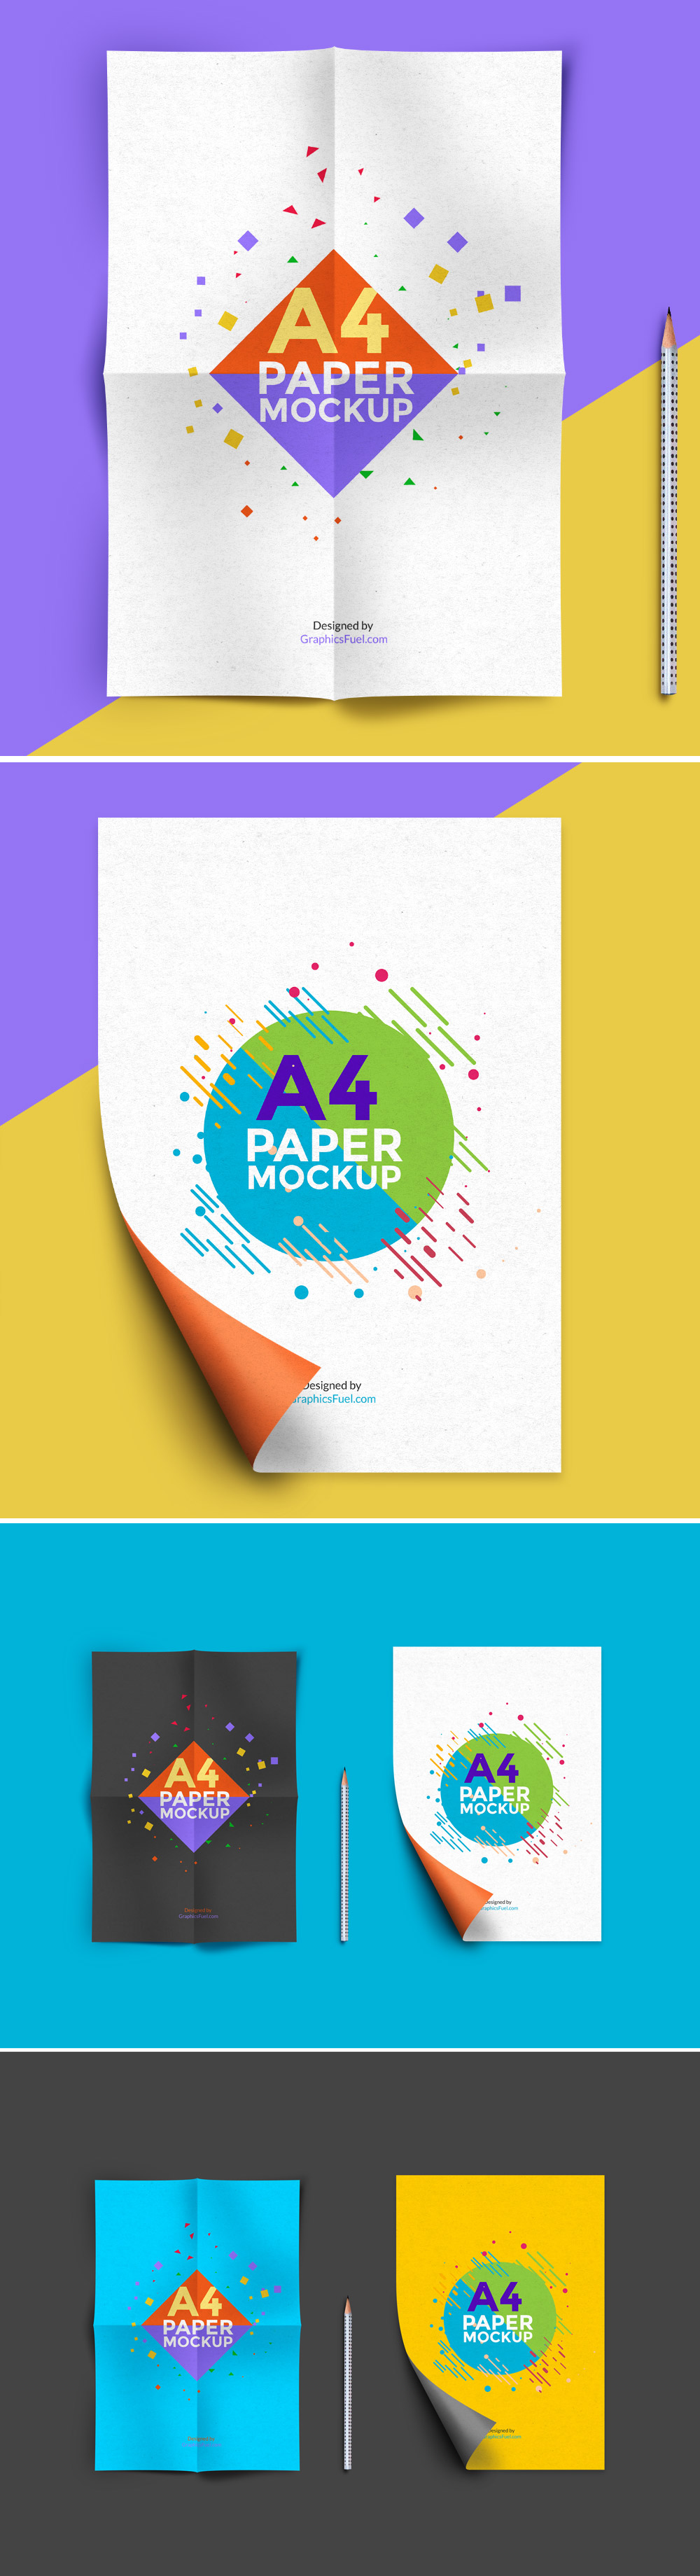 A4 Paper Mockup PSD Template